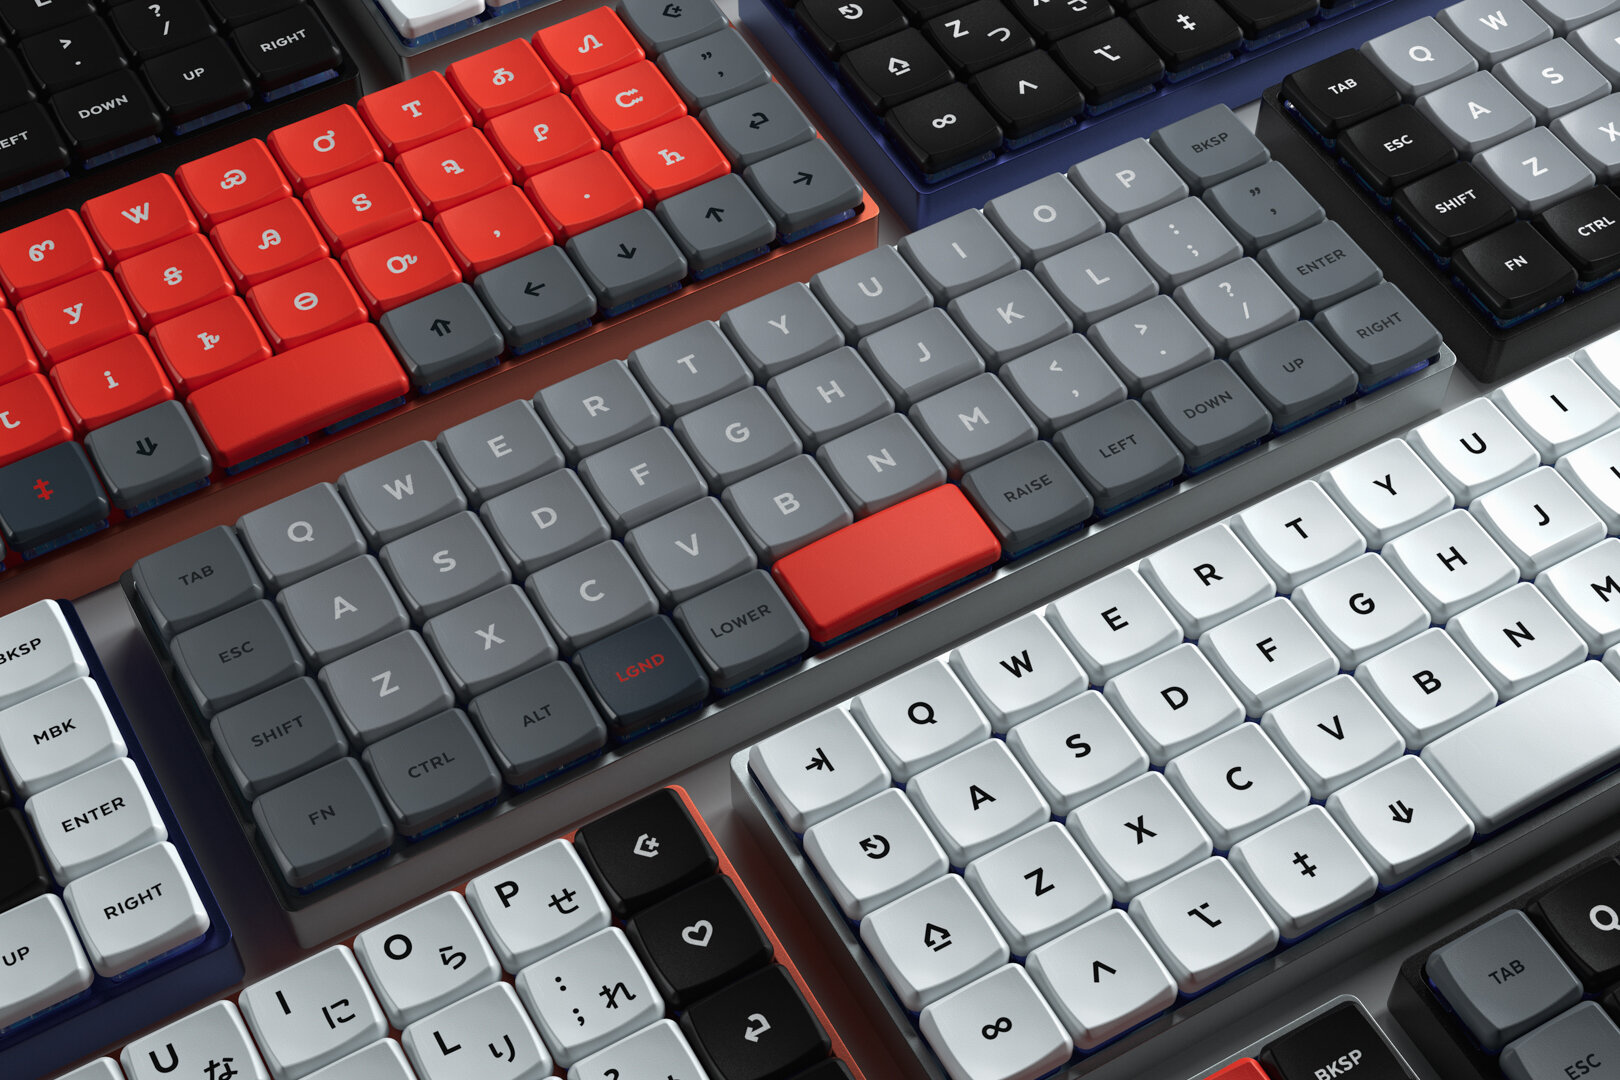 The new MBK keycaps with legends are now available in a group buy that runs until February 15th!